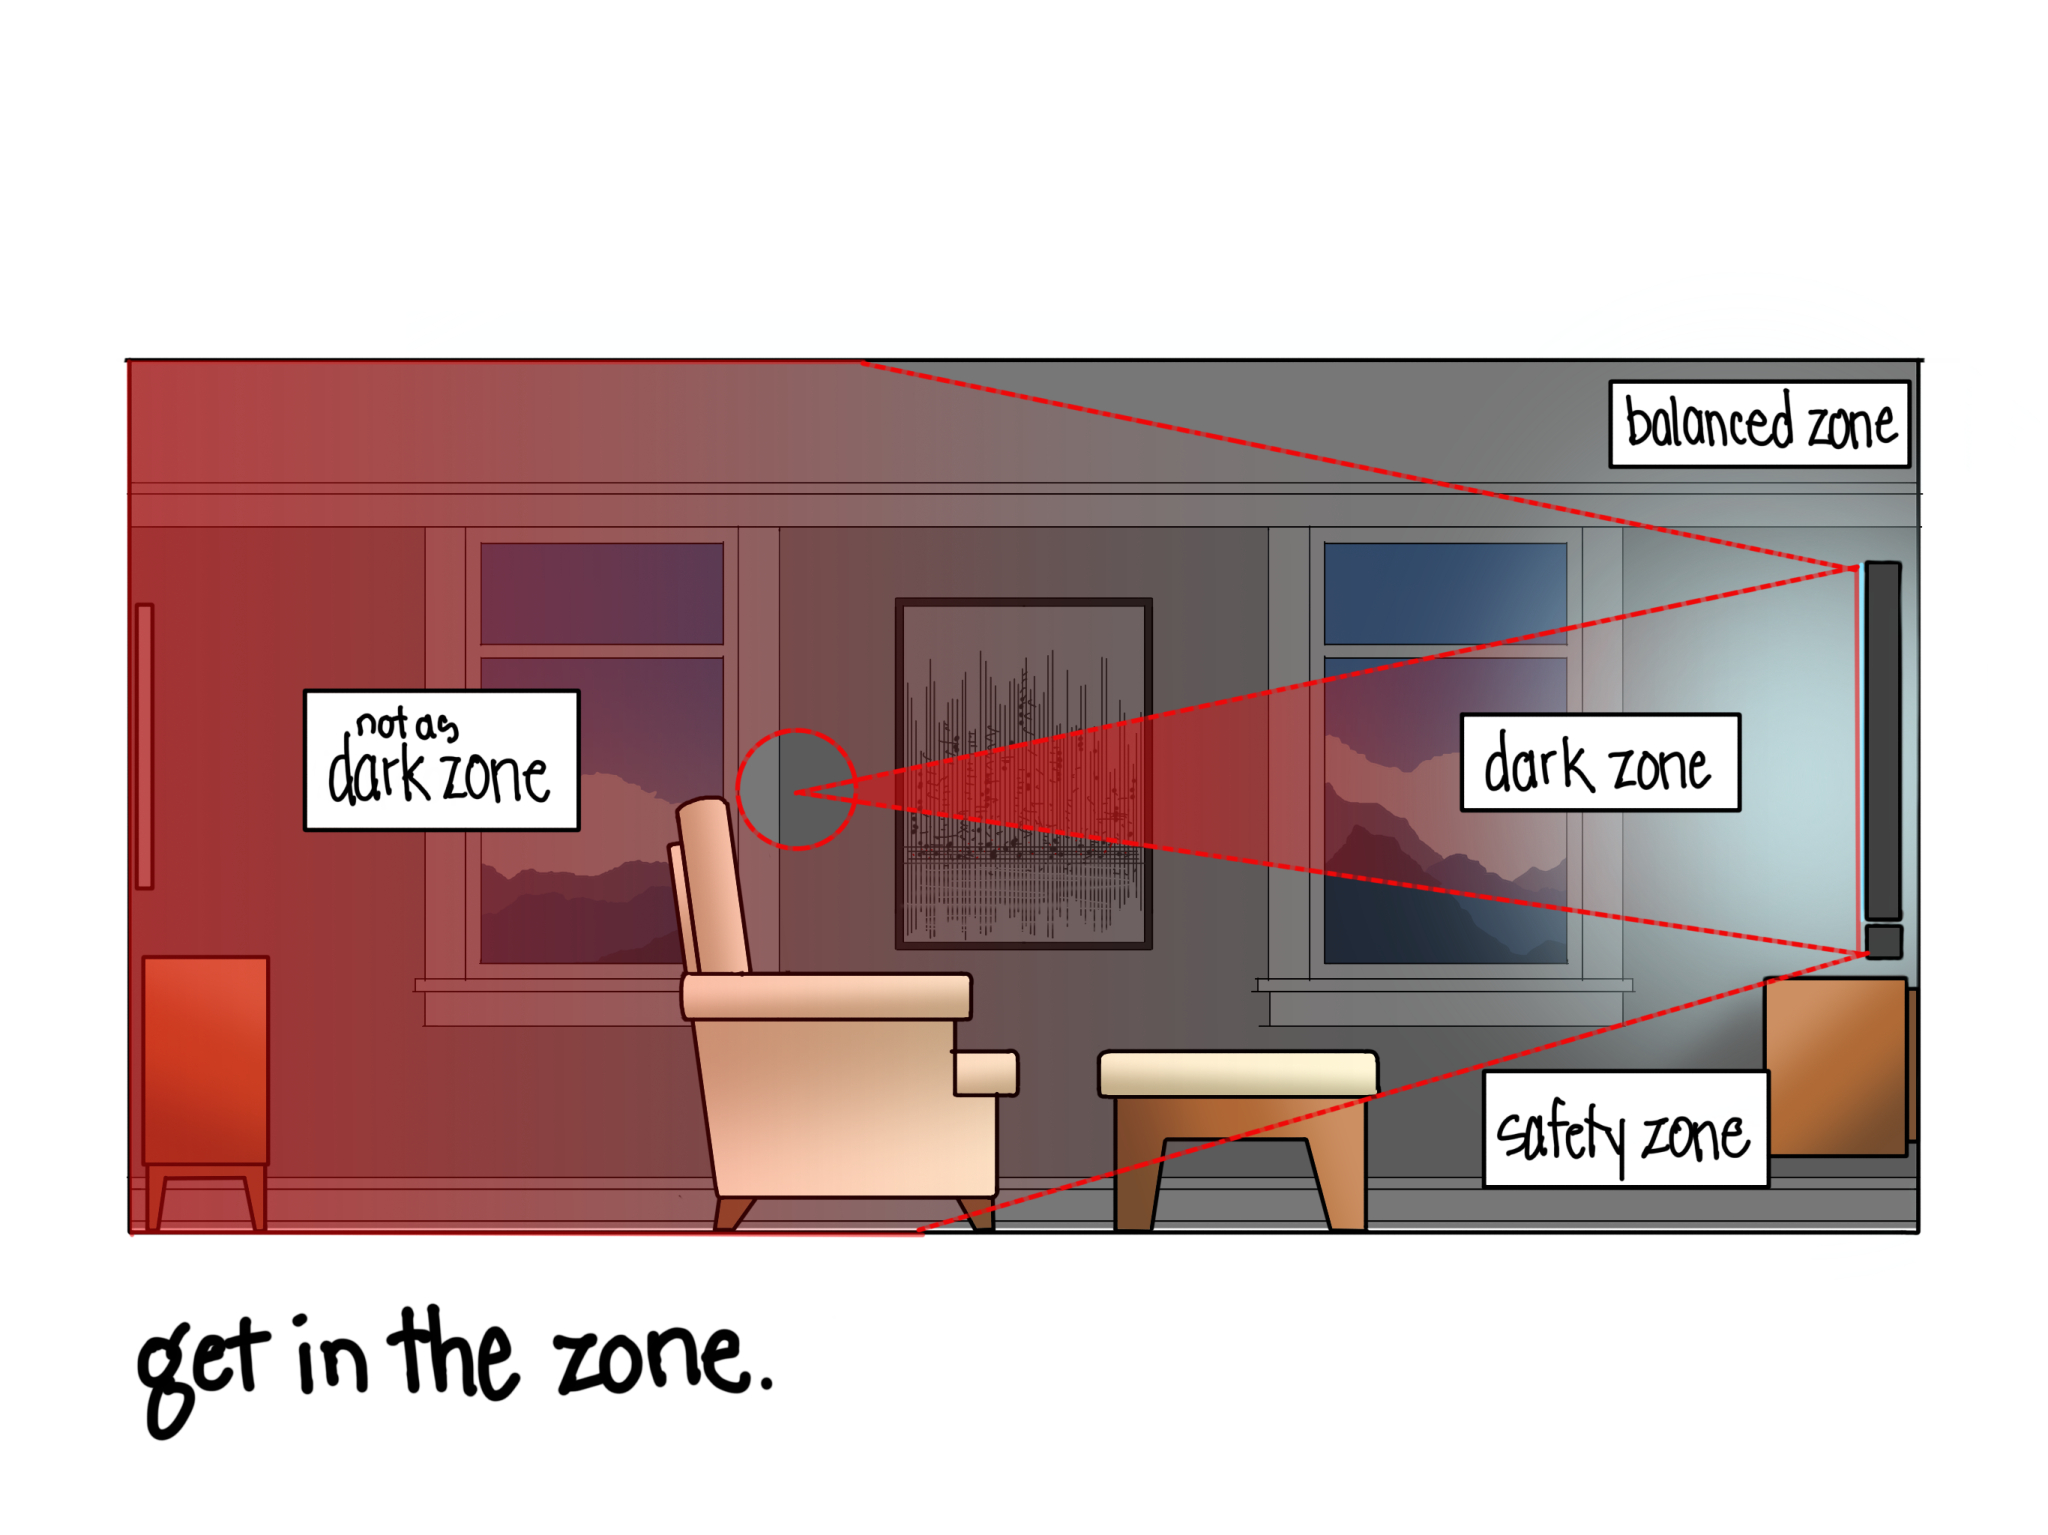 A diagram illustrating the different lighting zones in a living room, labelled "get in the zone"